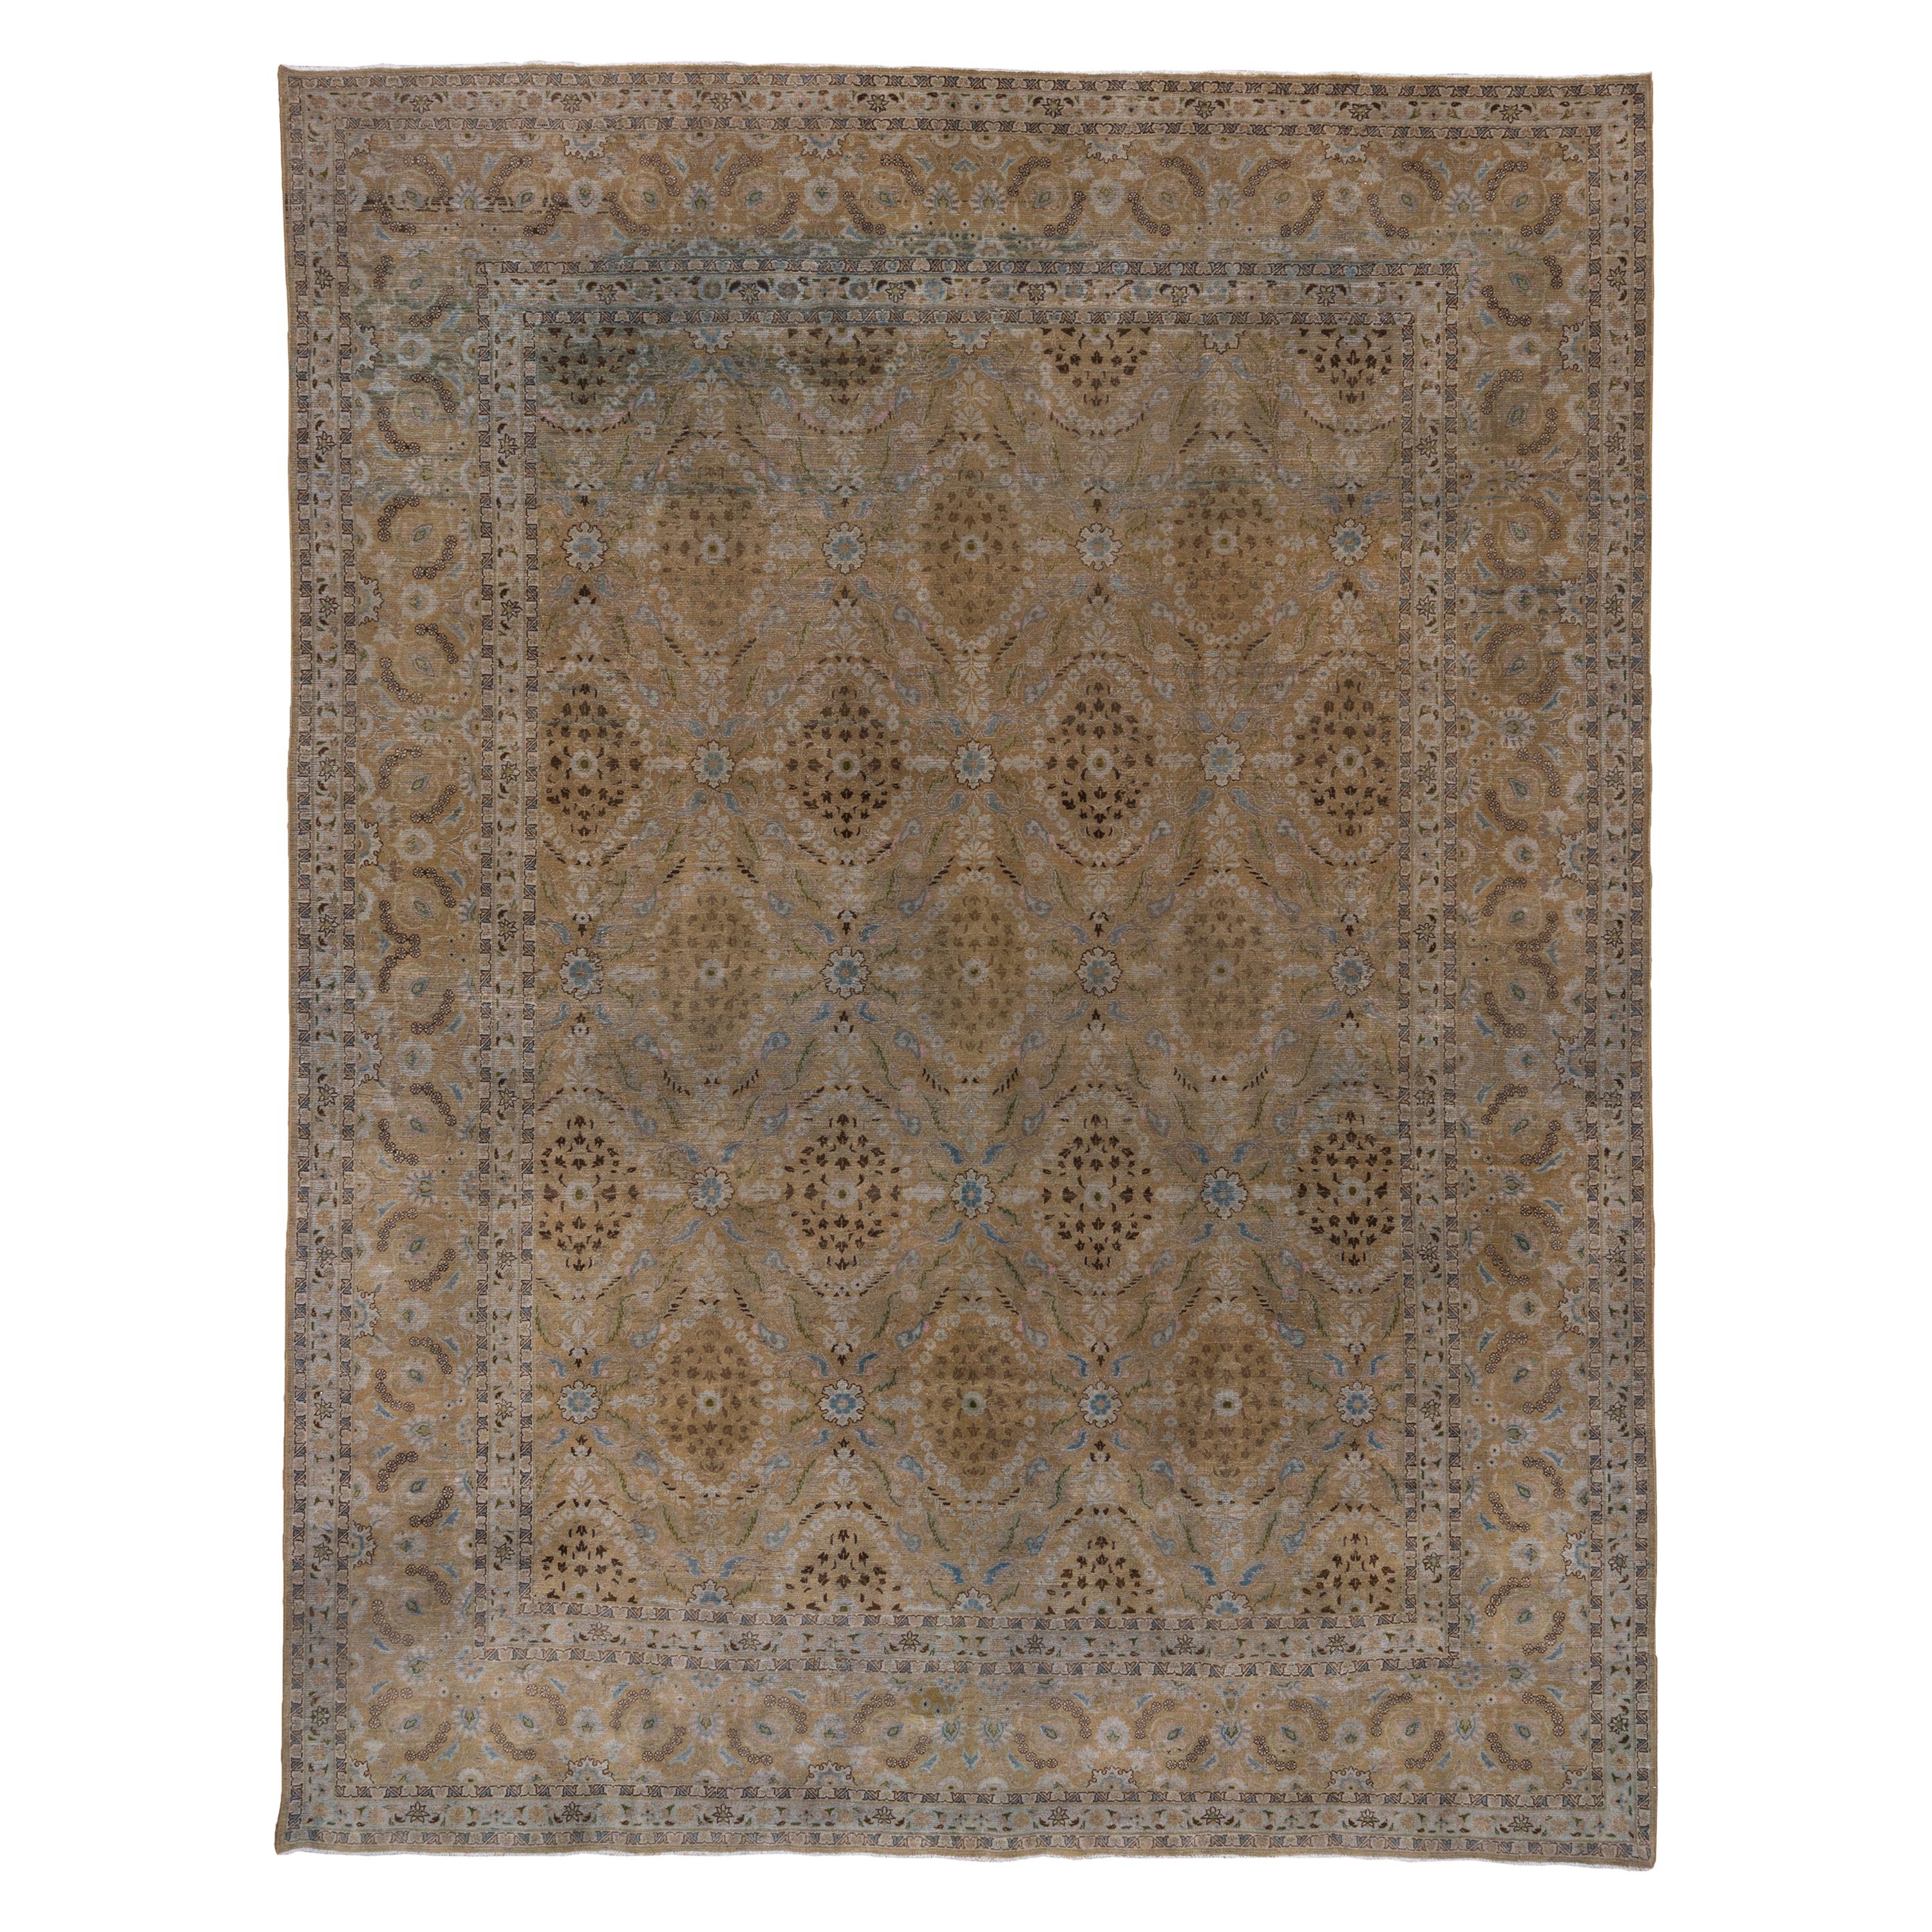 Antique Persian Meshed Carpet, Brown Field For Sale